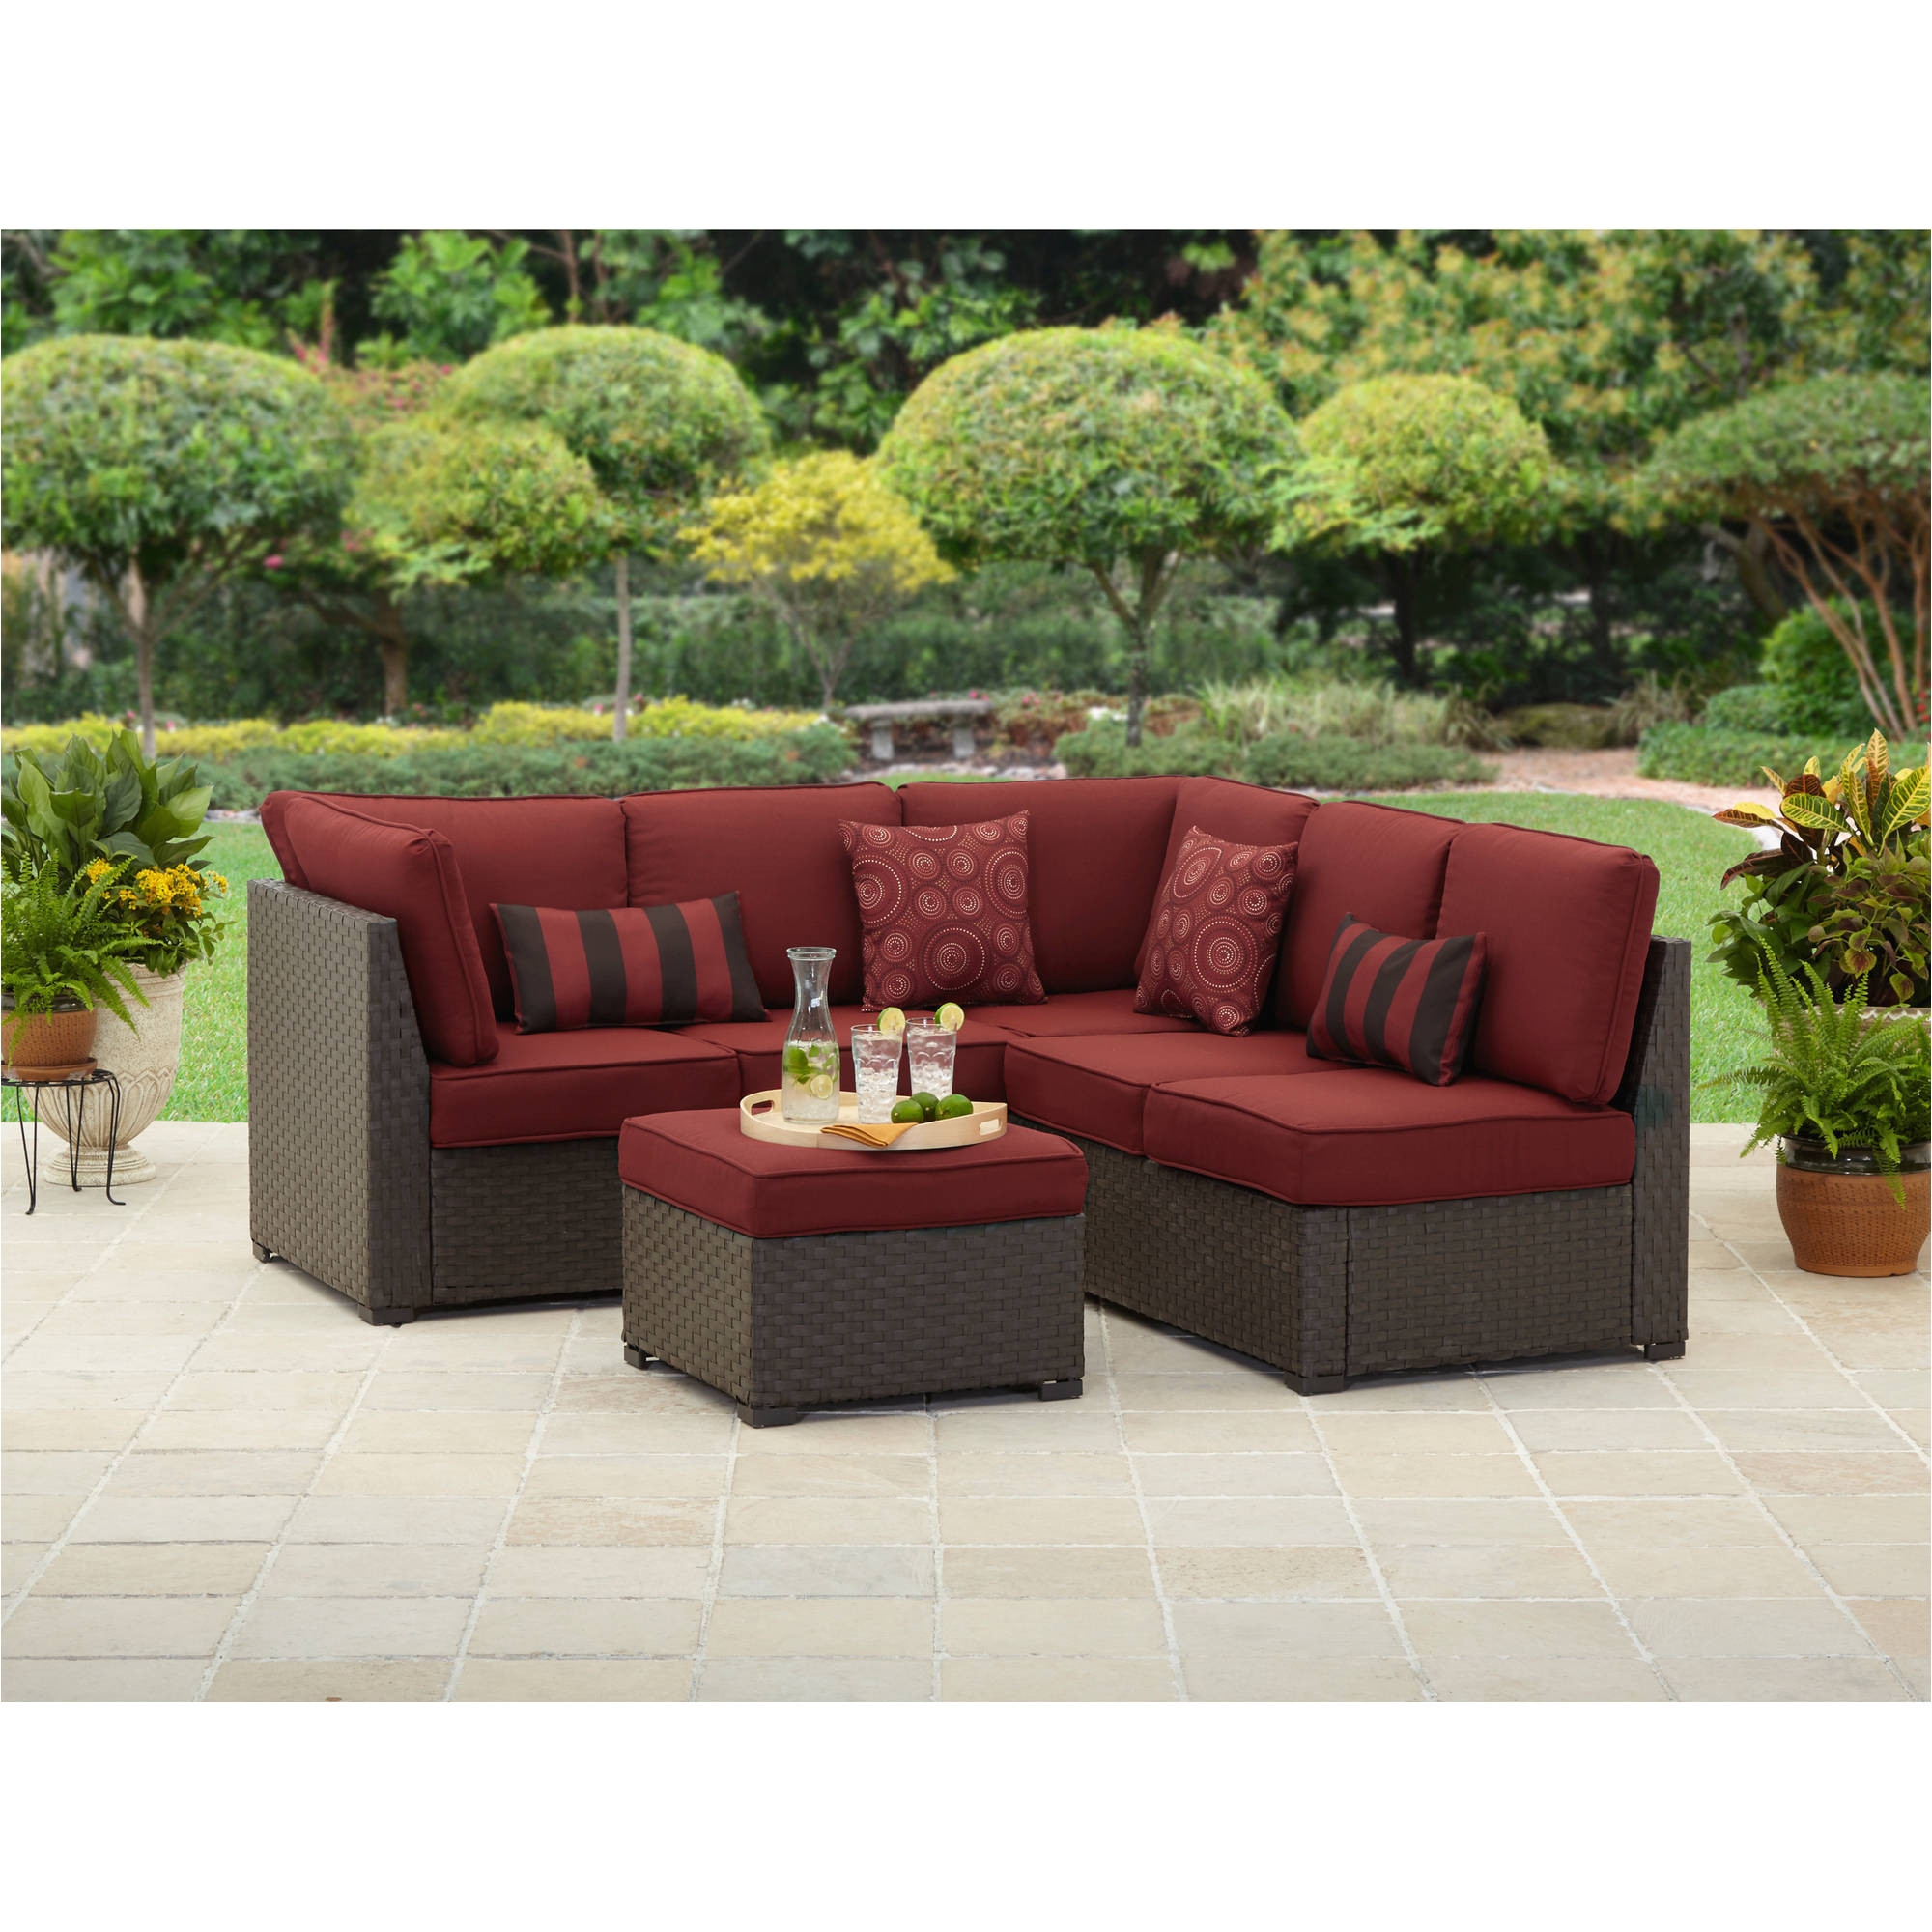 patio coral chair luxury unique wicker outdoor sofa 0d patio concept of all modern outdoor furniture